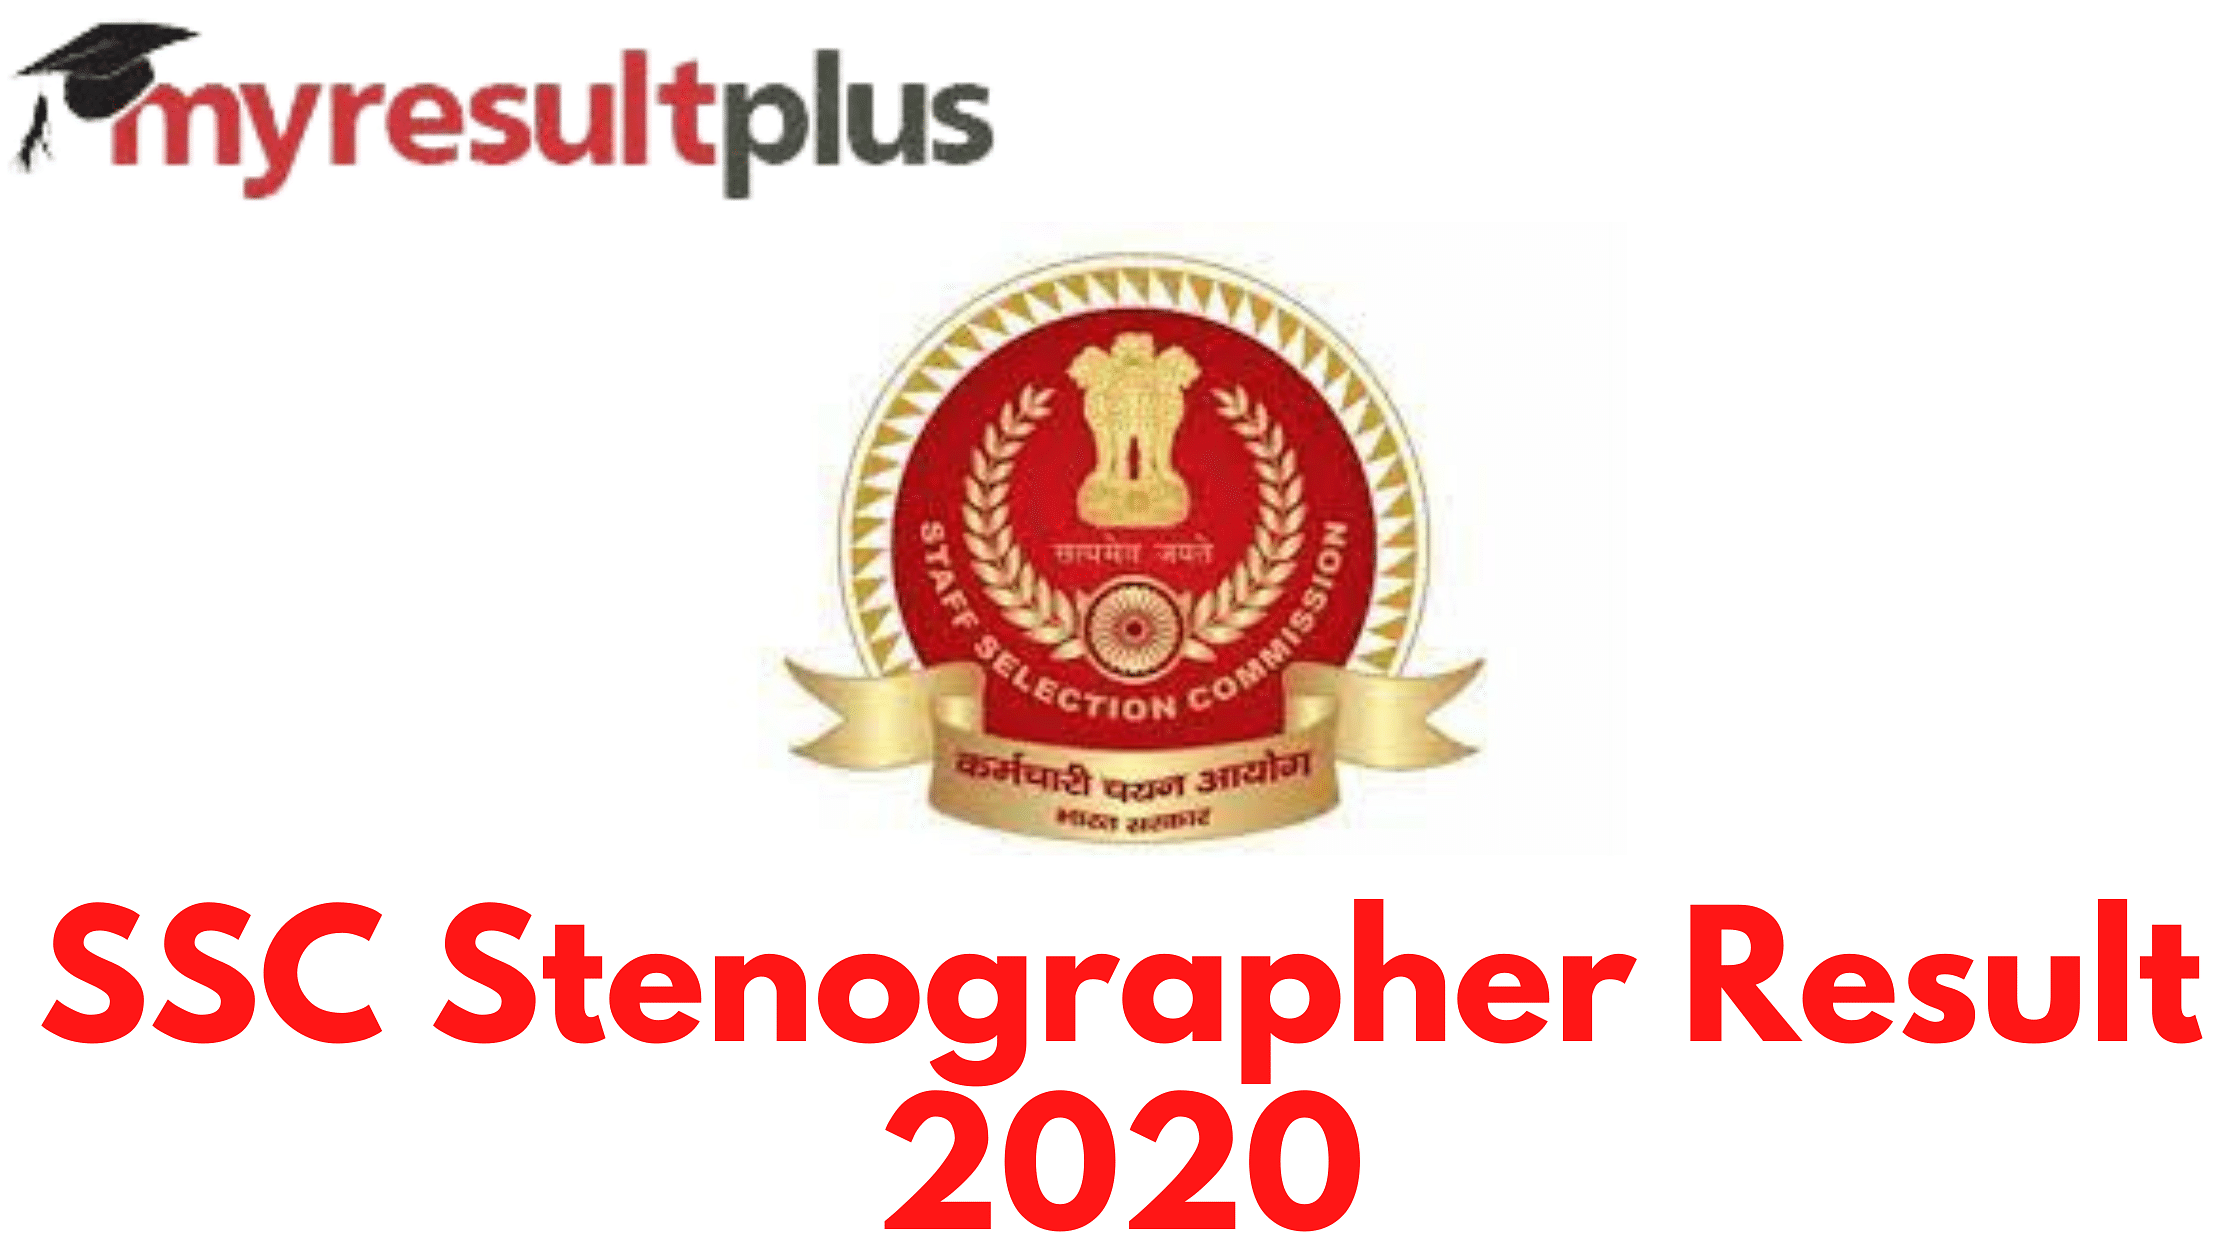 SSC Stenographer Skill Test Result 2020 Declared, Link to Check Here